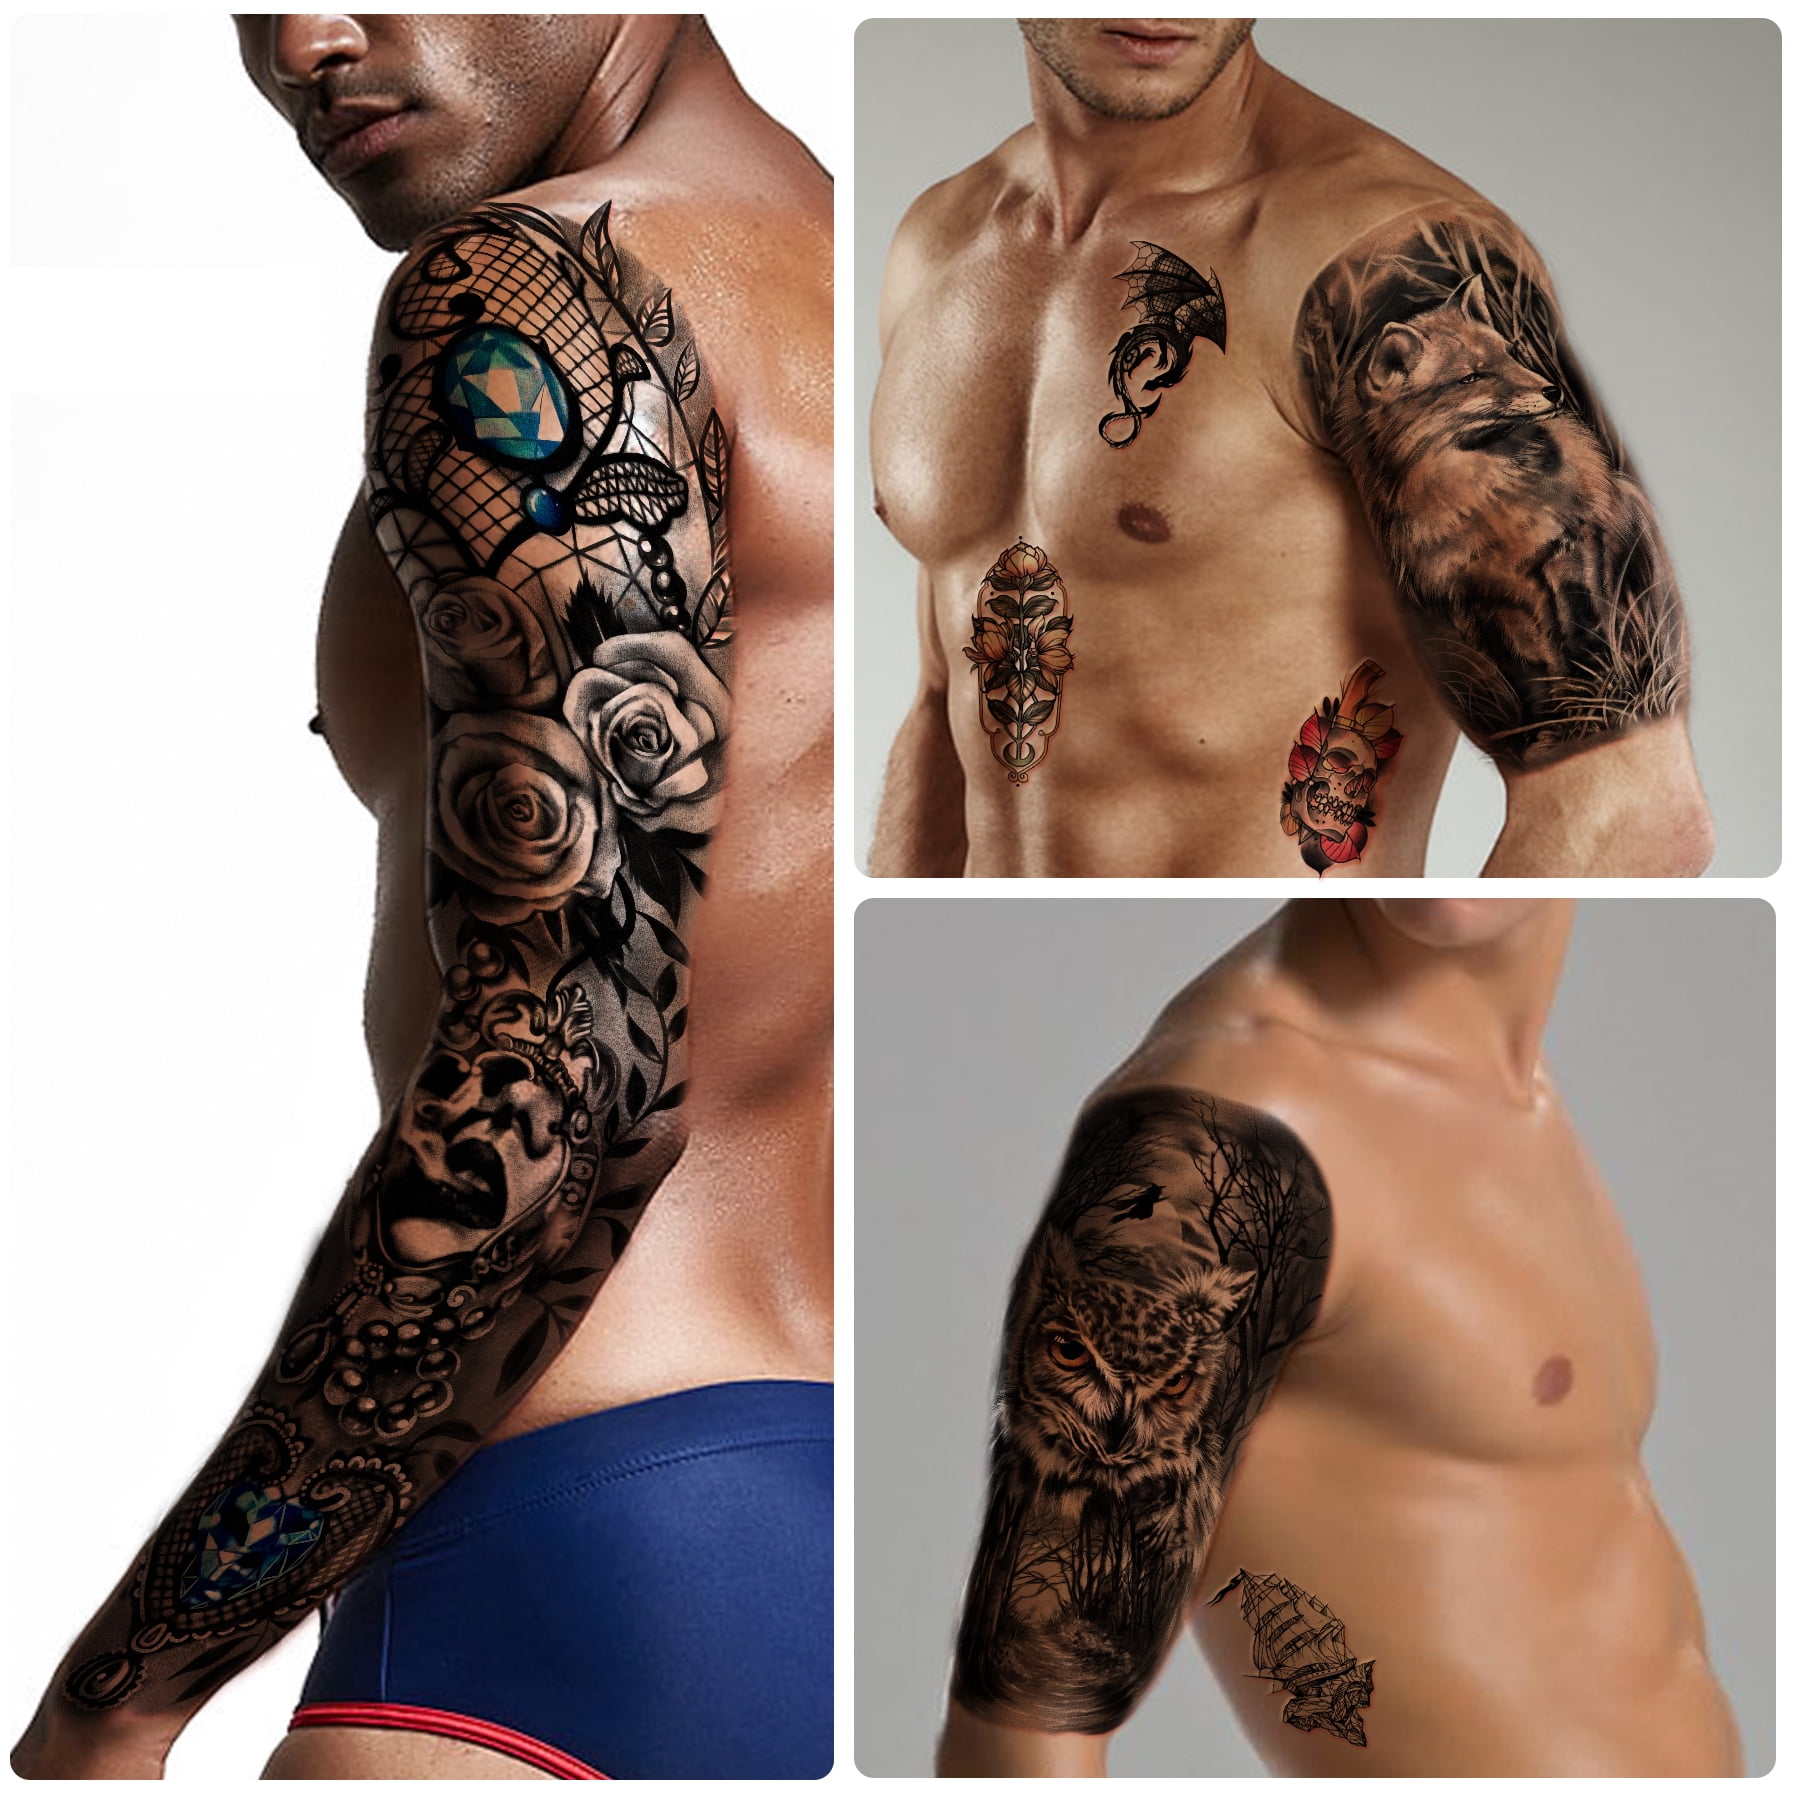 Waterproof Full Arm Temporary Tattoos 8 Sheets and Half Arm Shoulder Tattoo  8 Sheets, Extra Large LastingTattoo Stickers for Men and Women  (22.83